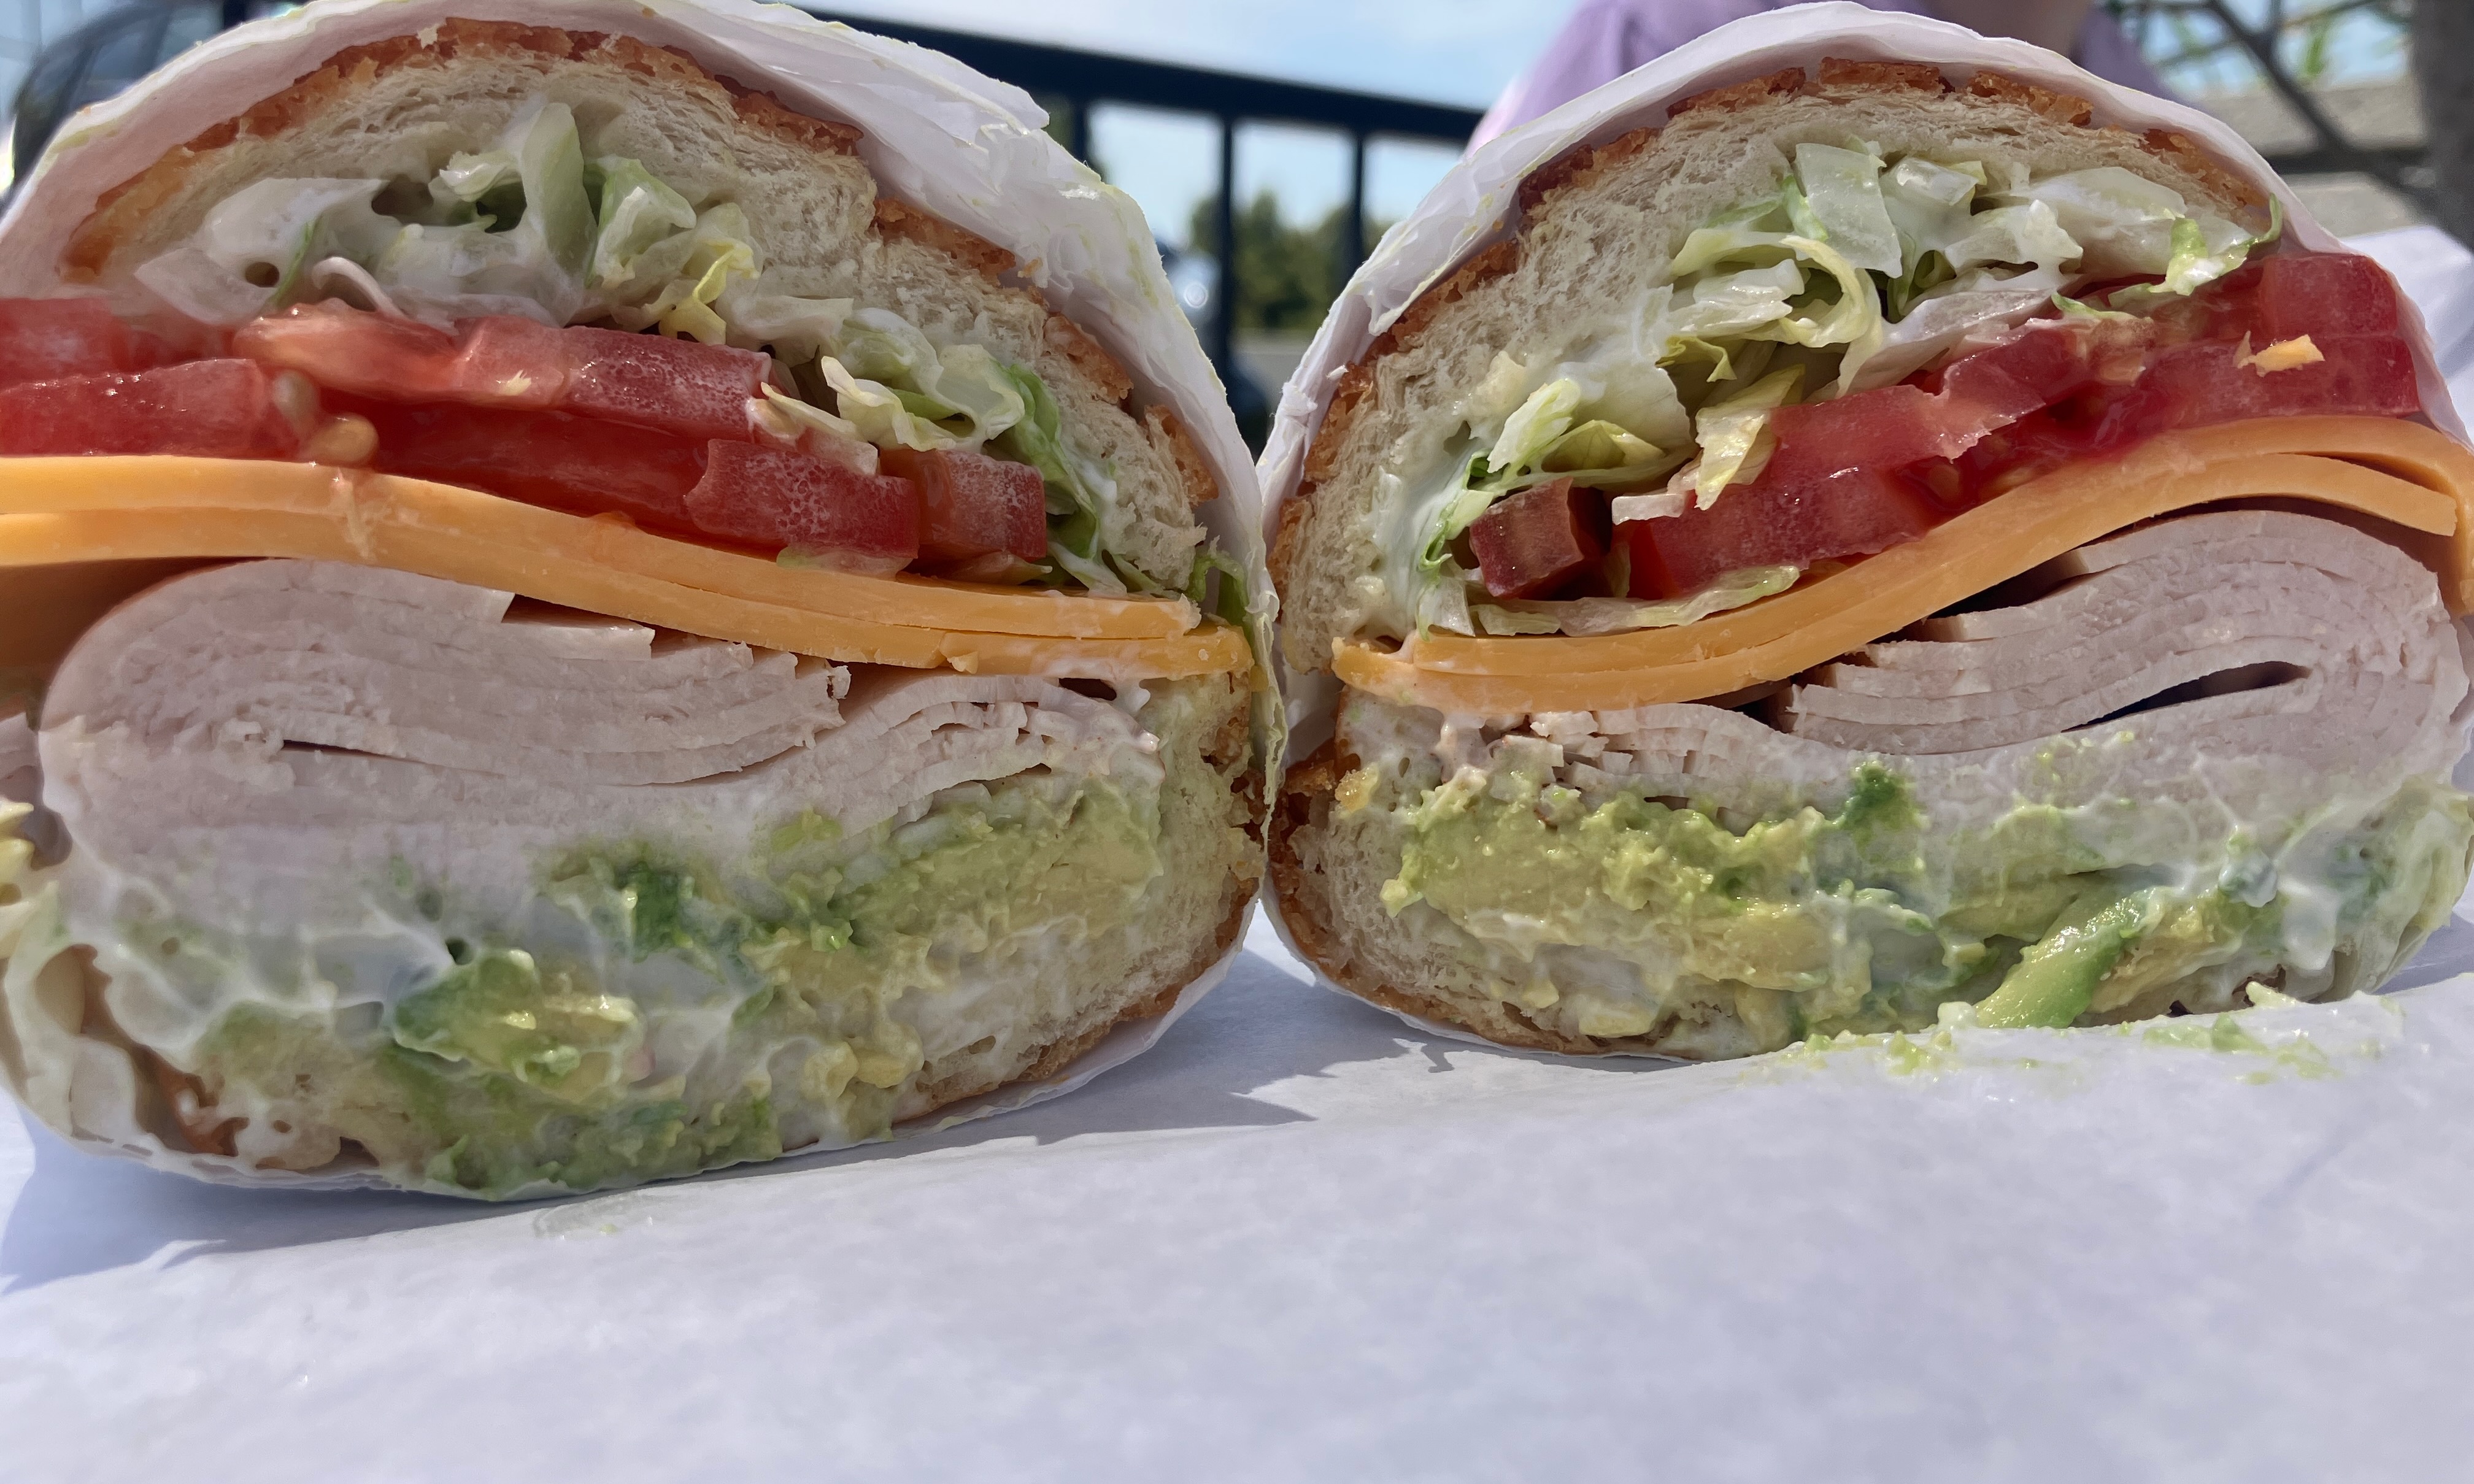 The sandwiches at Gigi's Cafe in Burlingame are generously-sized and award-winning -- the cafe was listed among Yelp.com's top 100 restaurants in 2023. (Kate Bradshaw/Bay Area News Group)